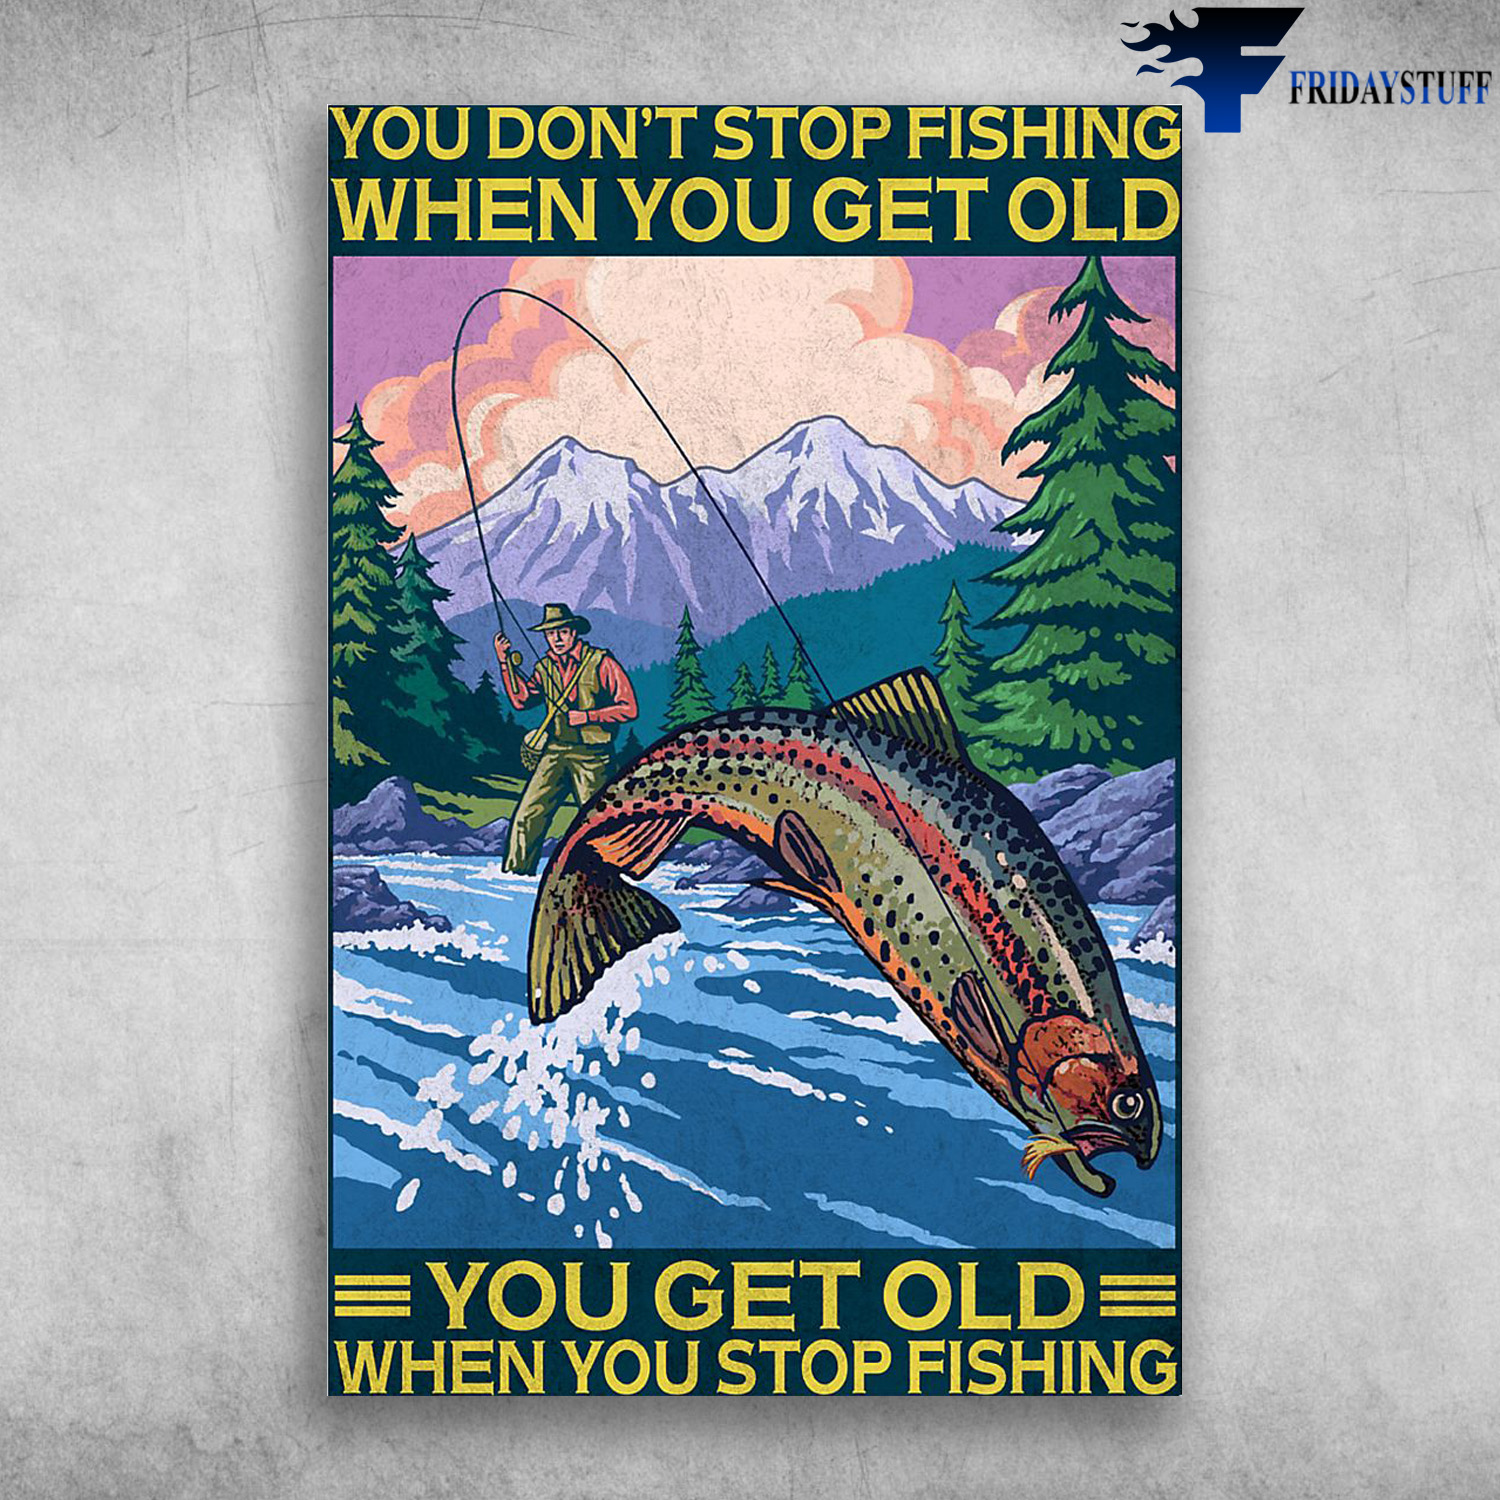 Man Fishing With The Salmon – You Don't Stop Fishing When You Get